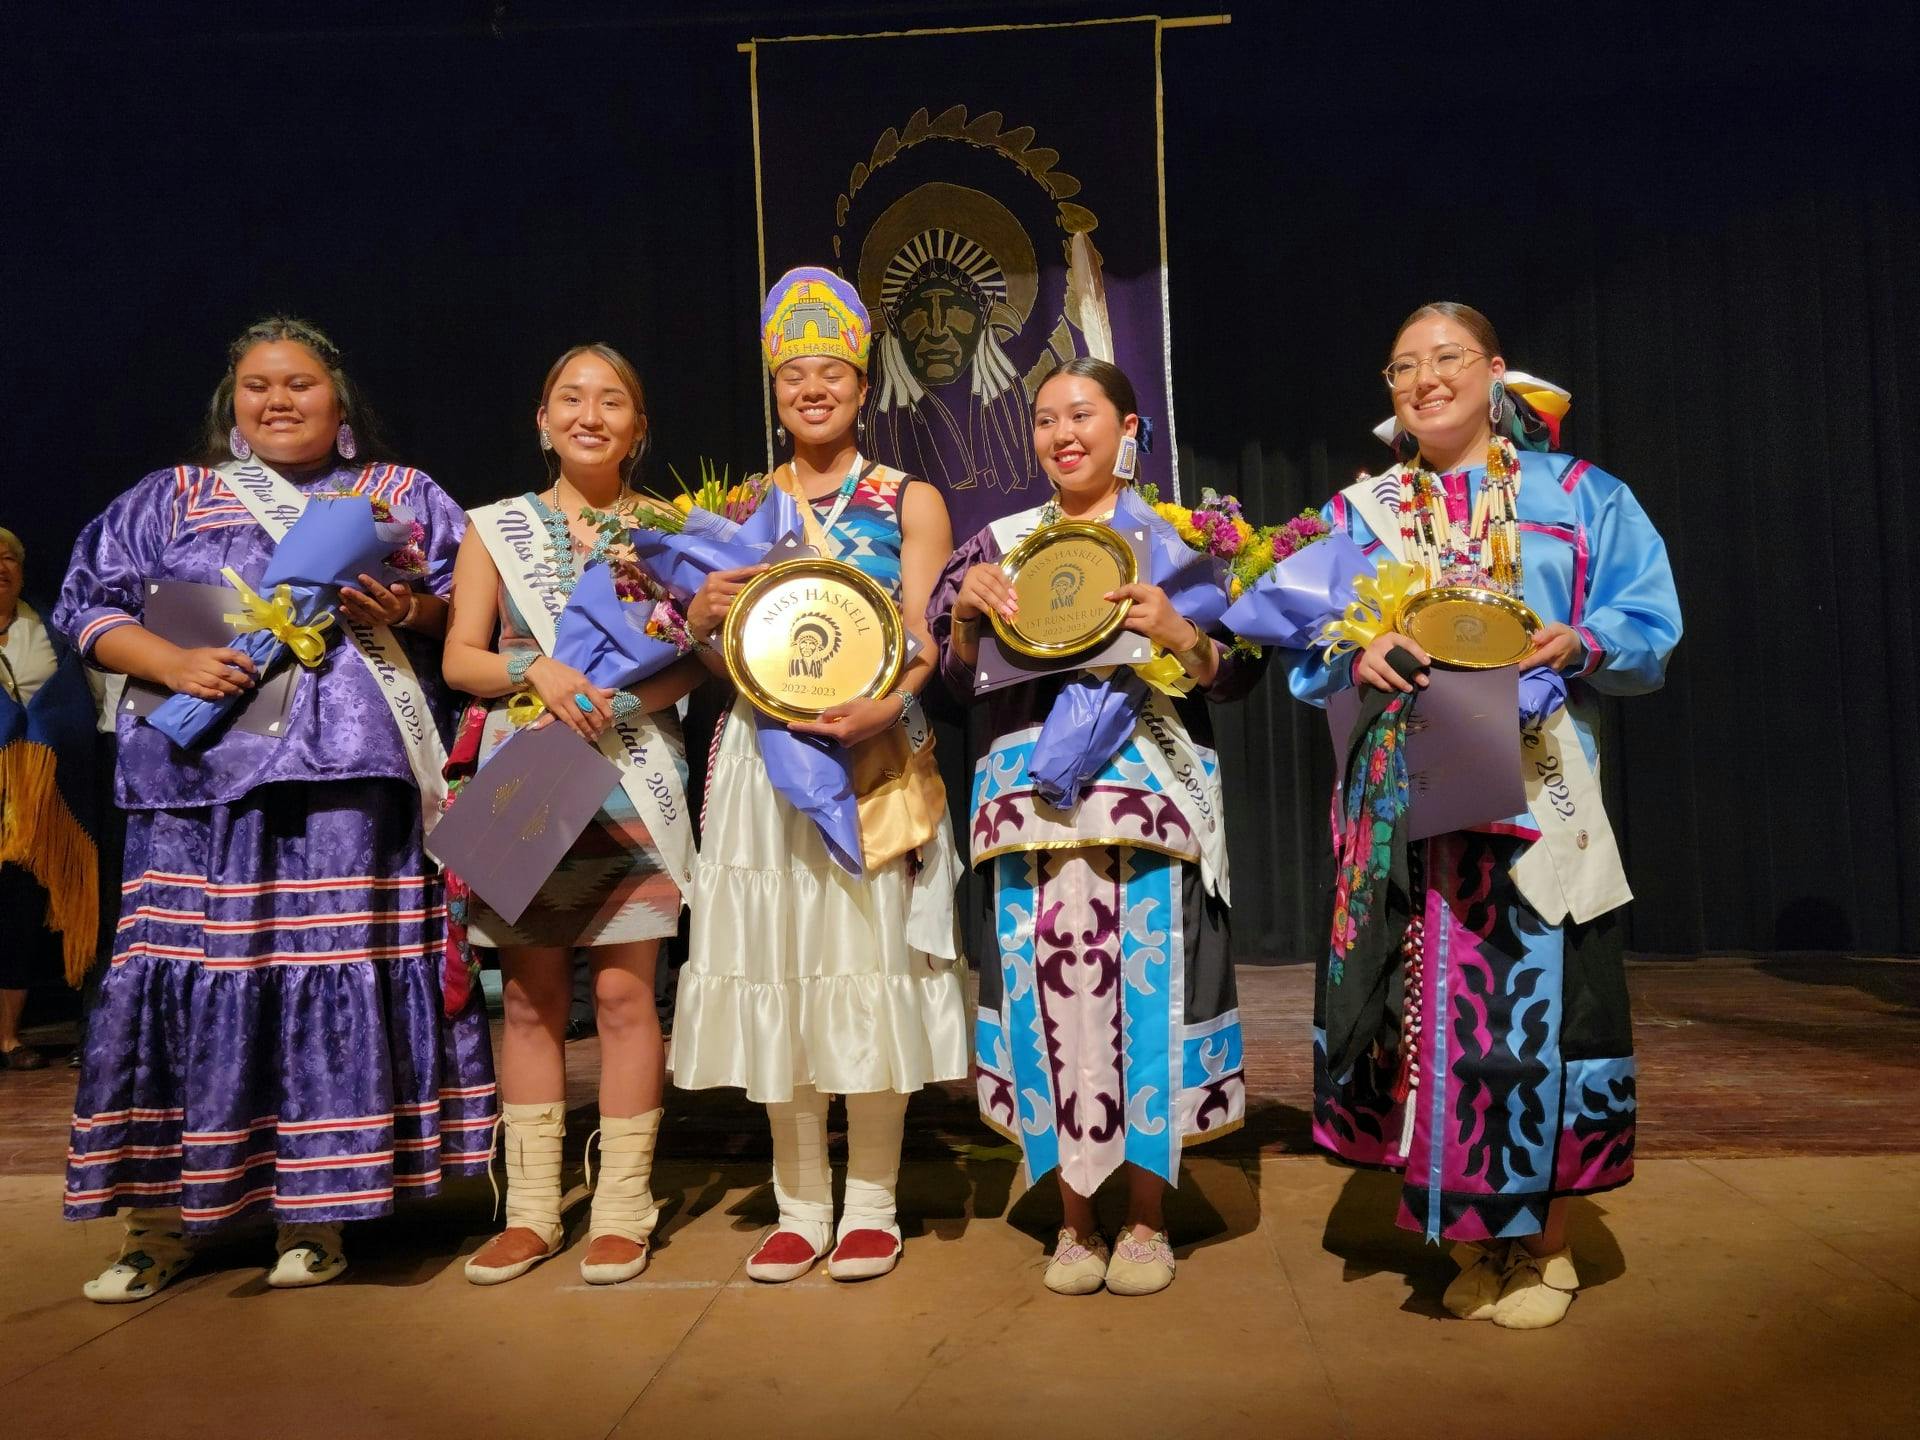 A group of students from the Miss Haskell event at Haskell Indian Nations University.